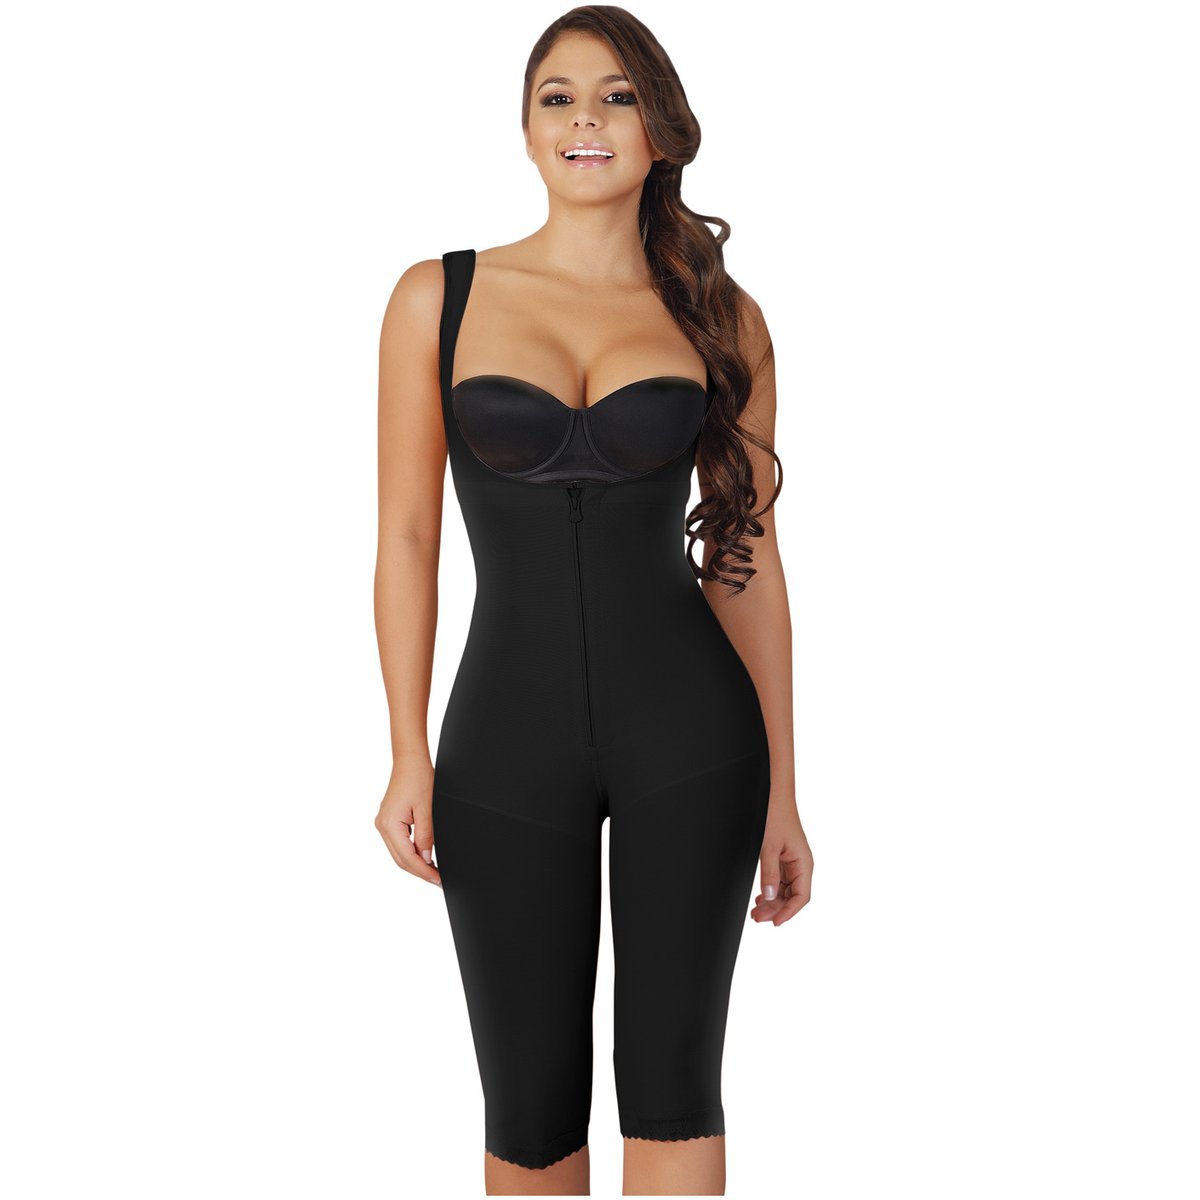 Why are Colombian girdles so widely recognized worldwide?